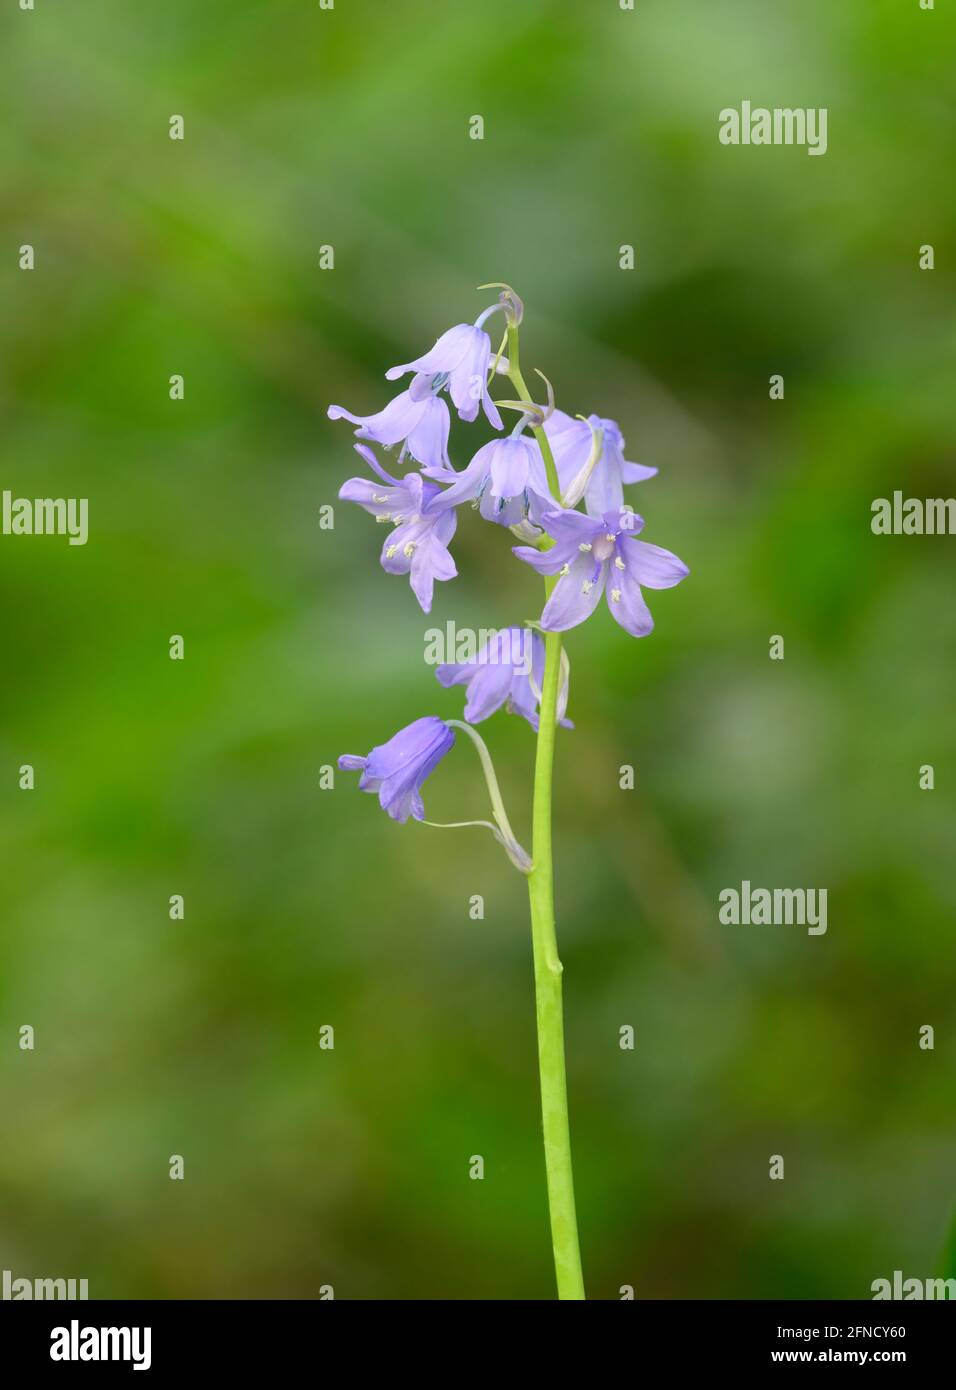 Solitary Bluebell (Hyacinthoides non-scripta) photographed against an out of focus foliage background Stock Photo